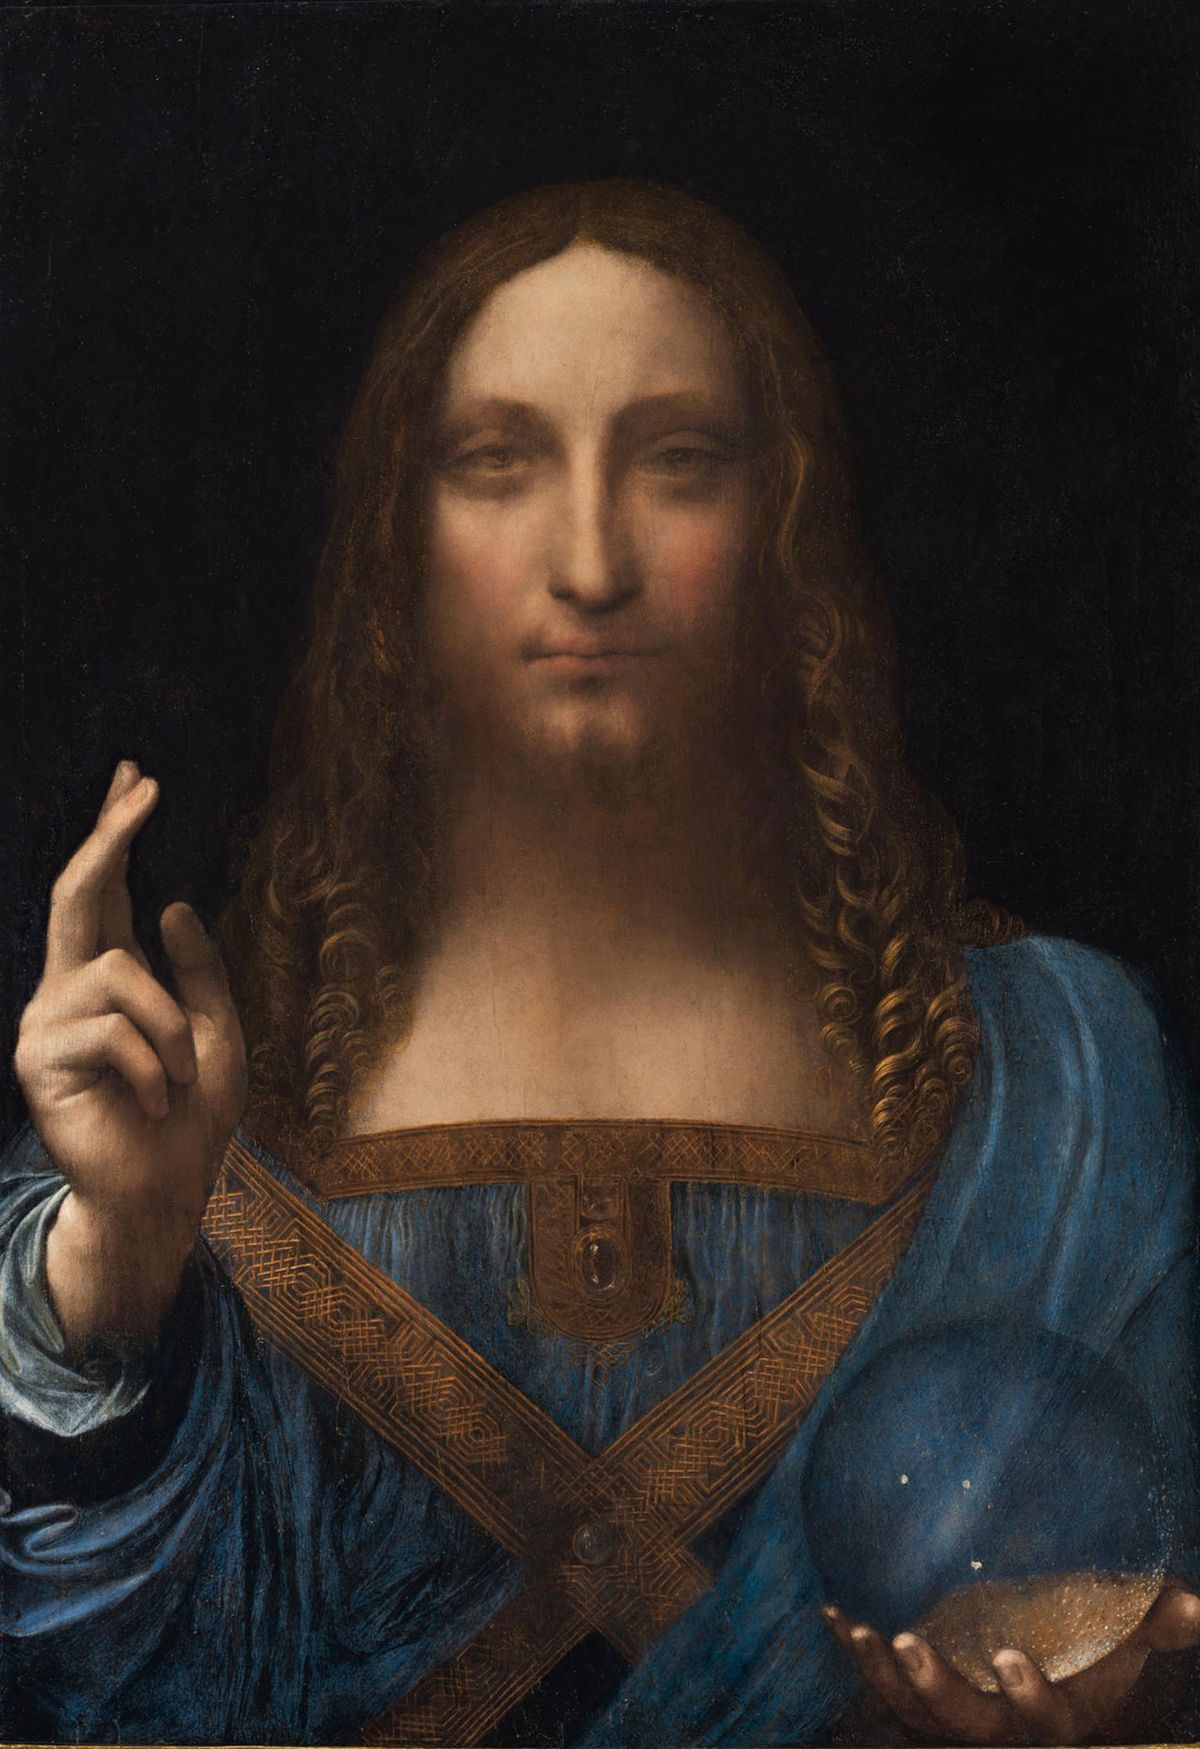 Sotheby's role in the private sale of the Salvator Mundi (around 1500), re-attributed to Leonardo da Vinci, plays a central role in the trial against Dmitry Rybolovlev. 
Image is public domain sourced / access rights from The Picture Art Collection / Alamy Stock Photo